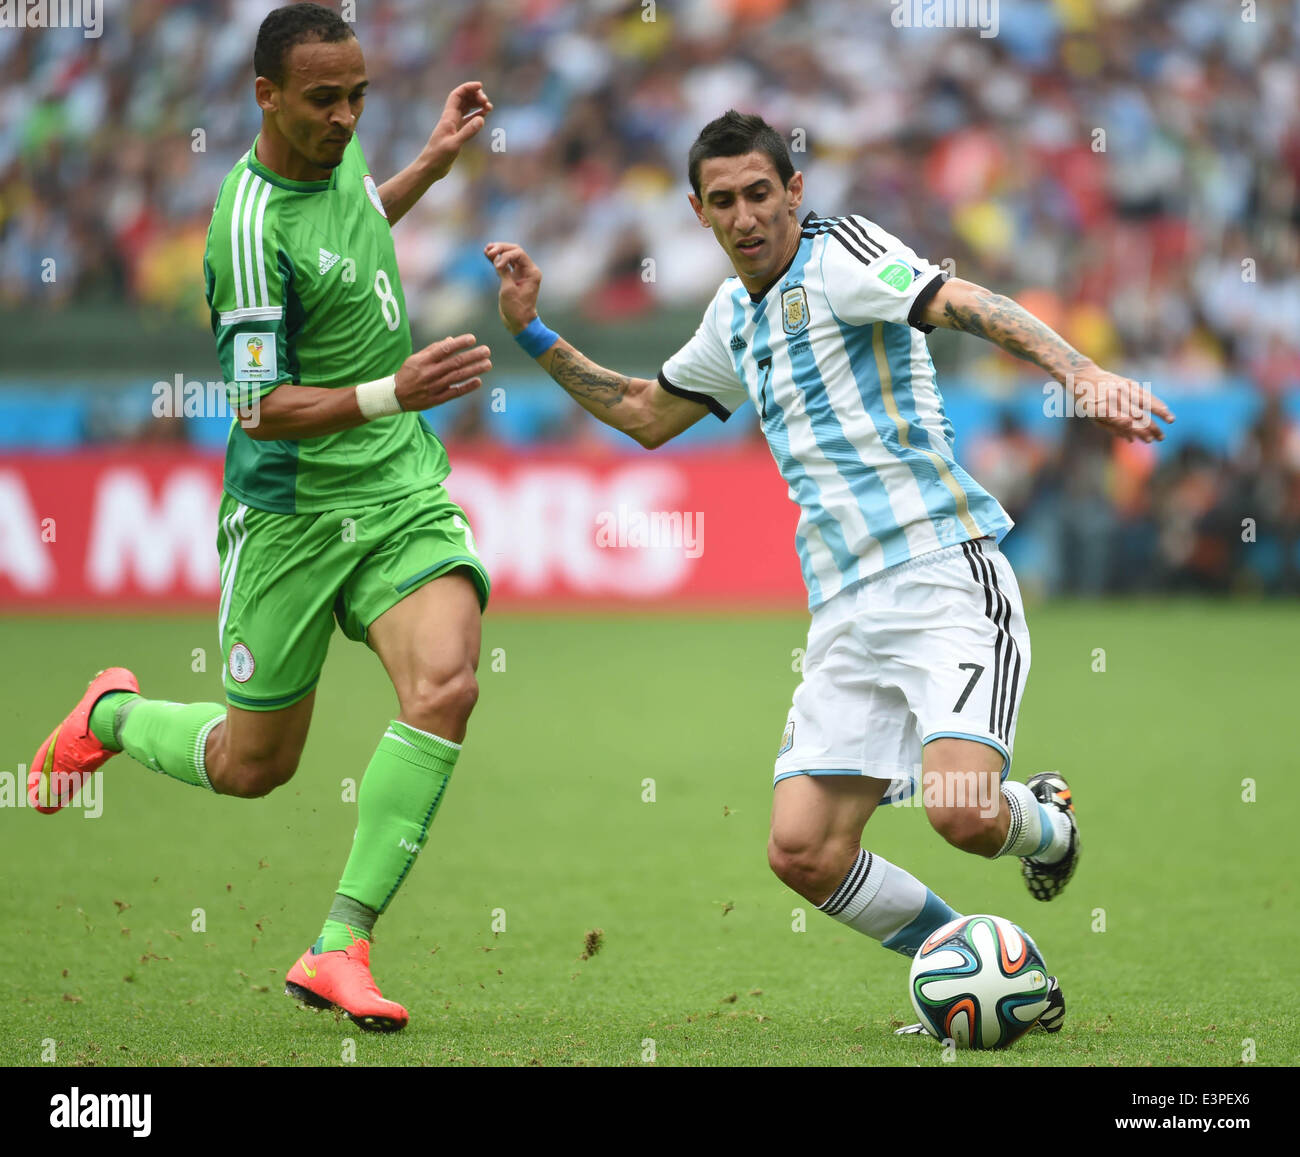 Porto Alegre, Brazil. 25th June, 2014. Argentina's Angel Di Maria (R) vies with Nigeria's Peter Osaze Odemwingie during a Group F match between Nigeria and Argentina of 2014 FIFA World Cup at the Estadio Beira-Rio Stadium in Porto Alegre, Brazil, on June 25, 2014. Argentina won 3-2 over Nigeria on Wednesday. © Li Ga/Xinhua/Alamy Live News Stock Photo